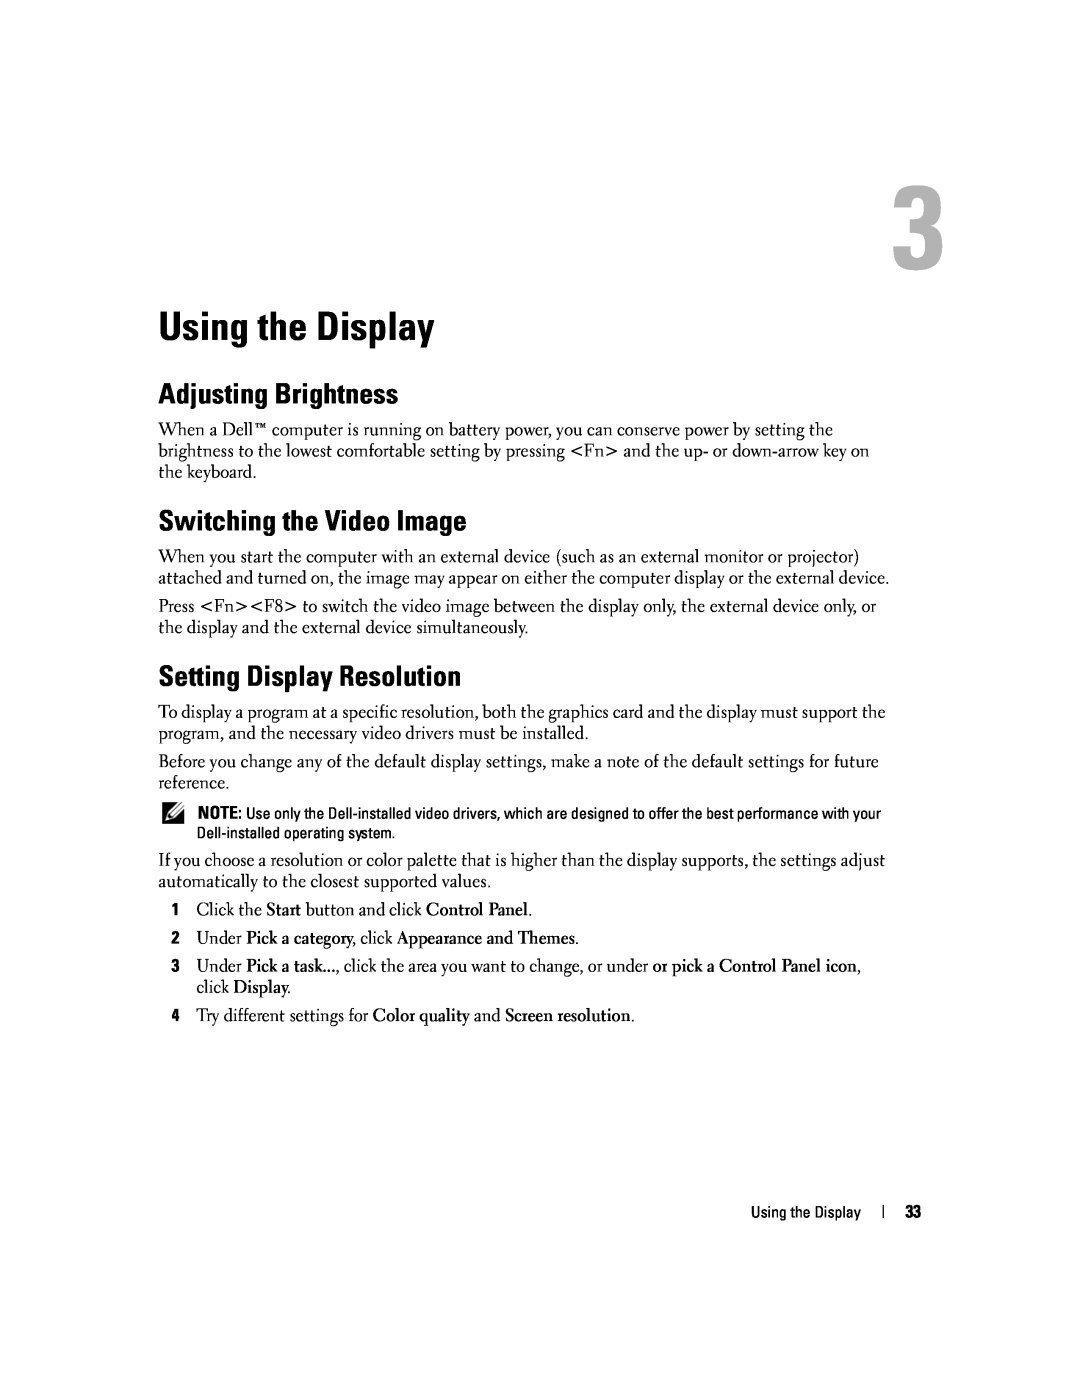 Dell 1501 owner manual Using the Display, Adjusting Brightness, Switching the Video Image, Setting Display Resolution 